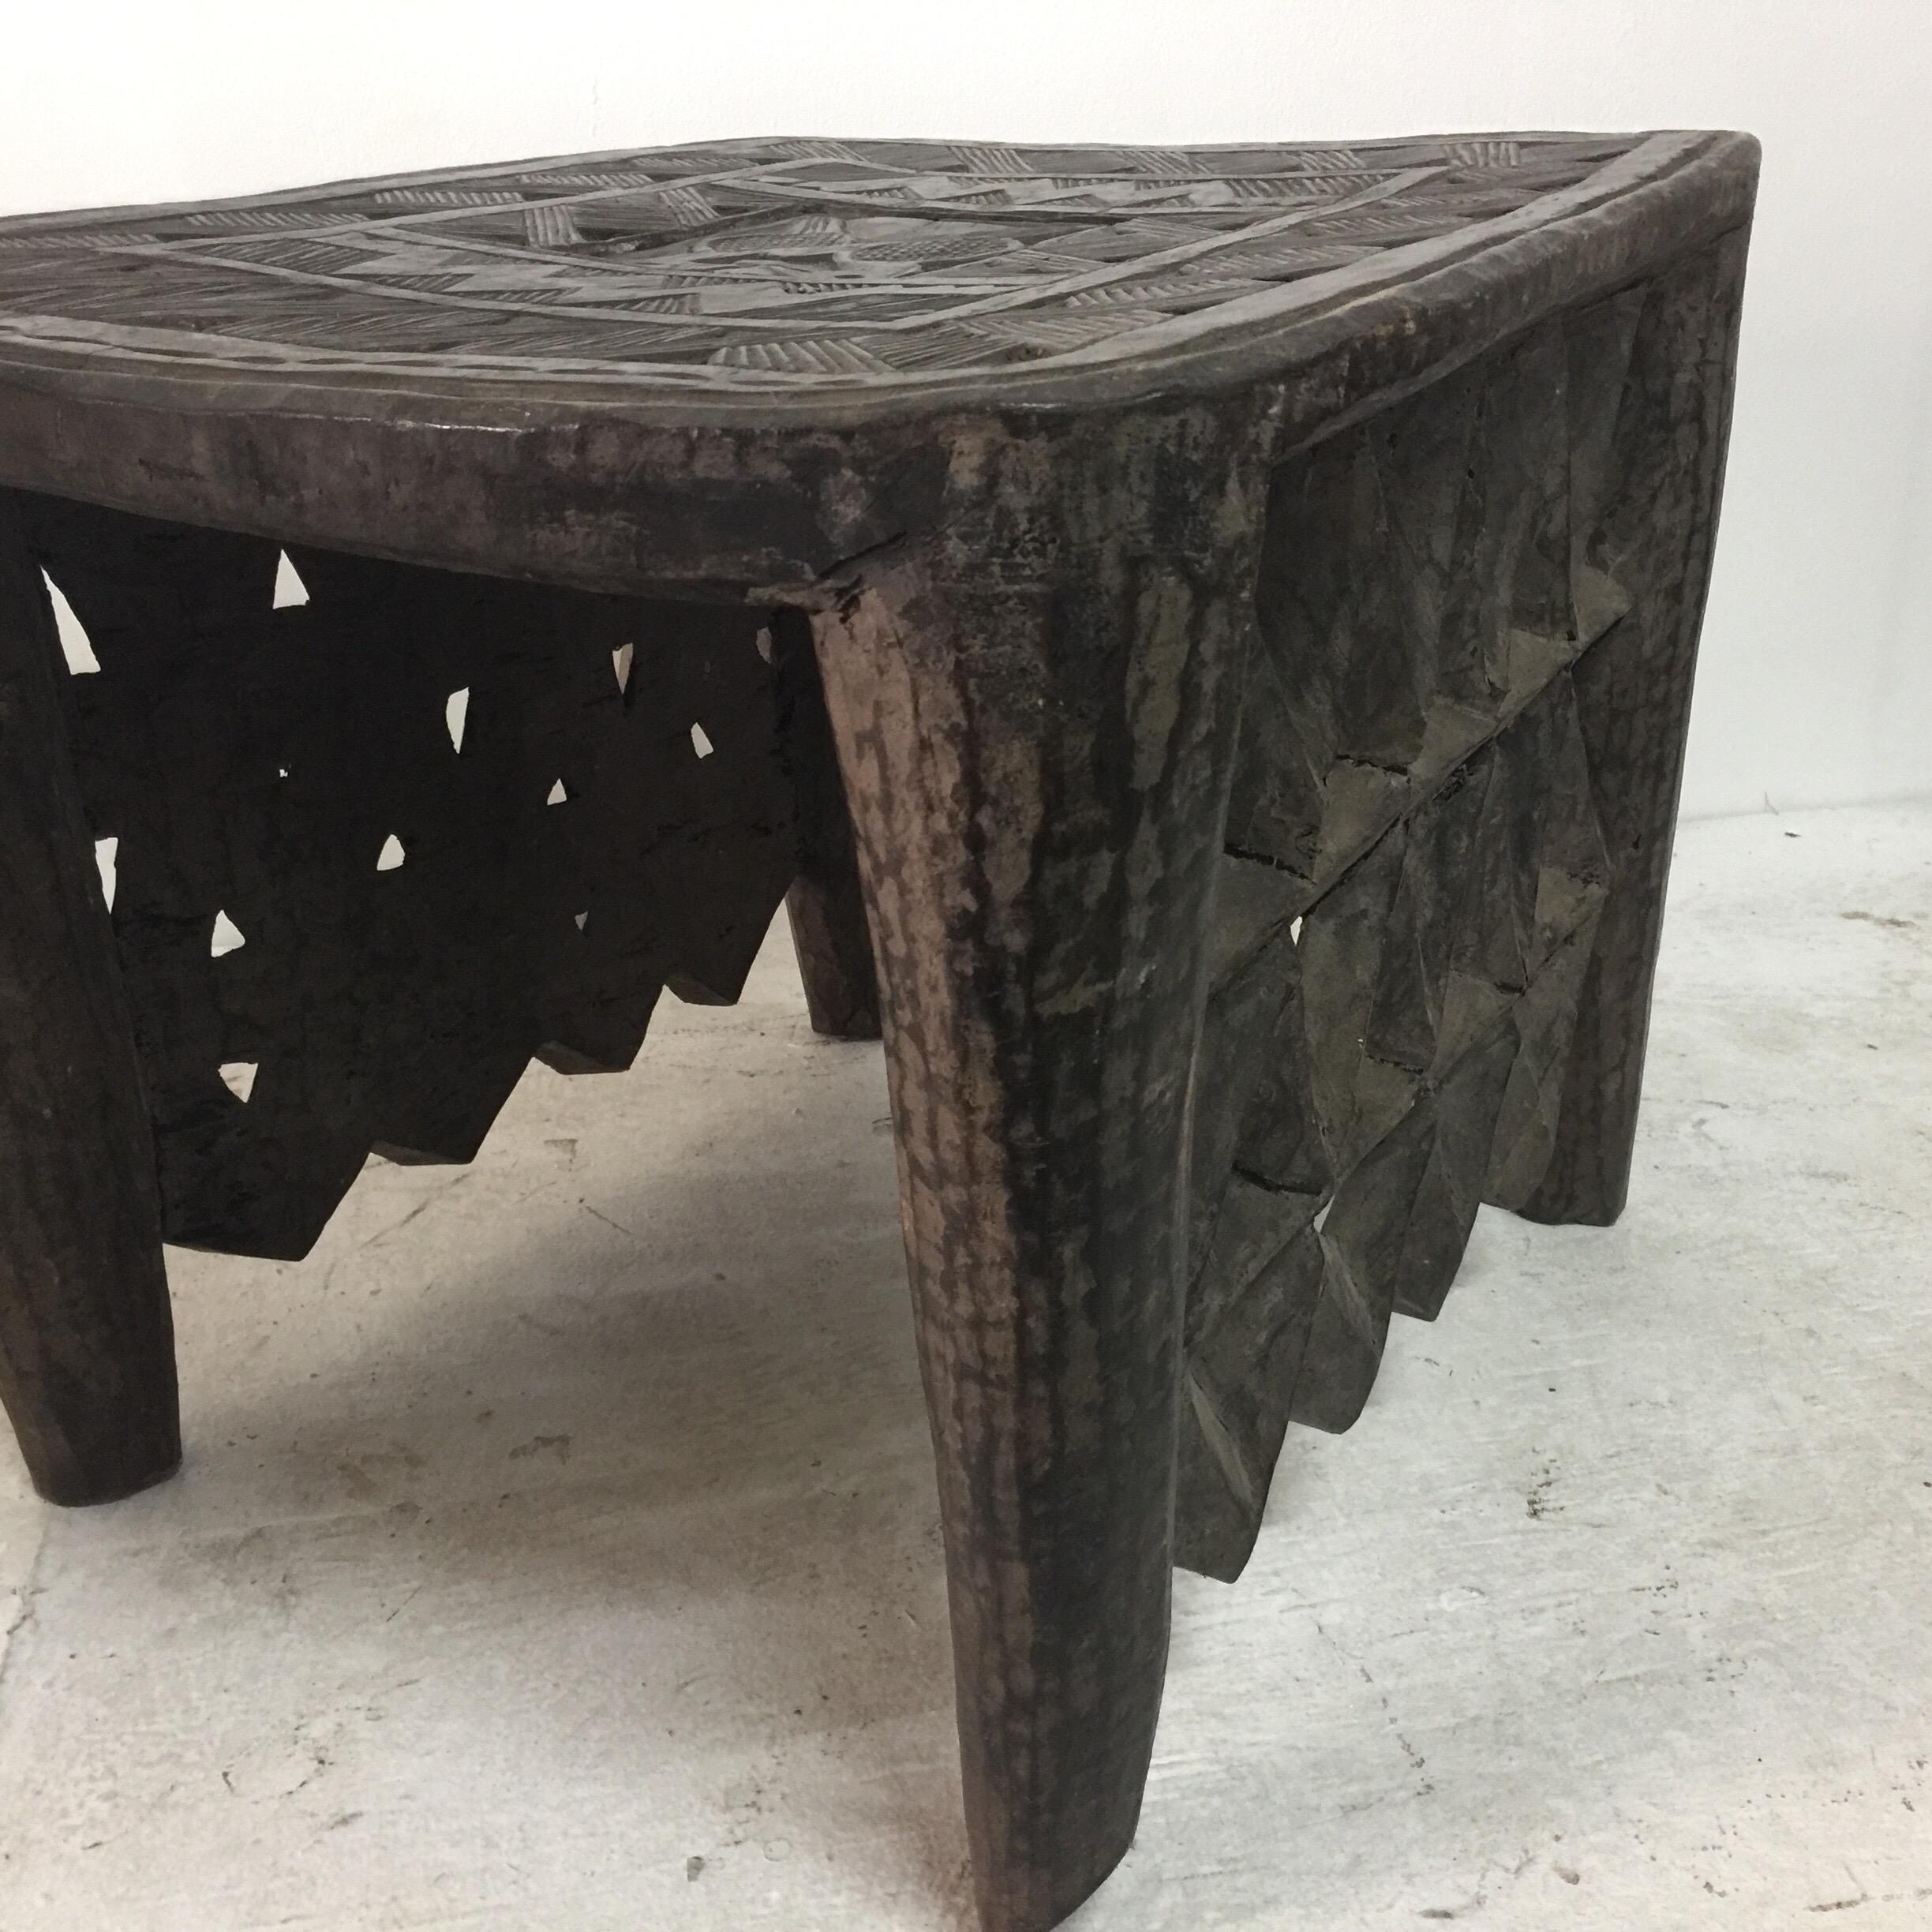 20th Century Tribal African Sidetable / Bench with Secret Compartment